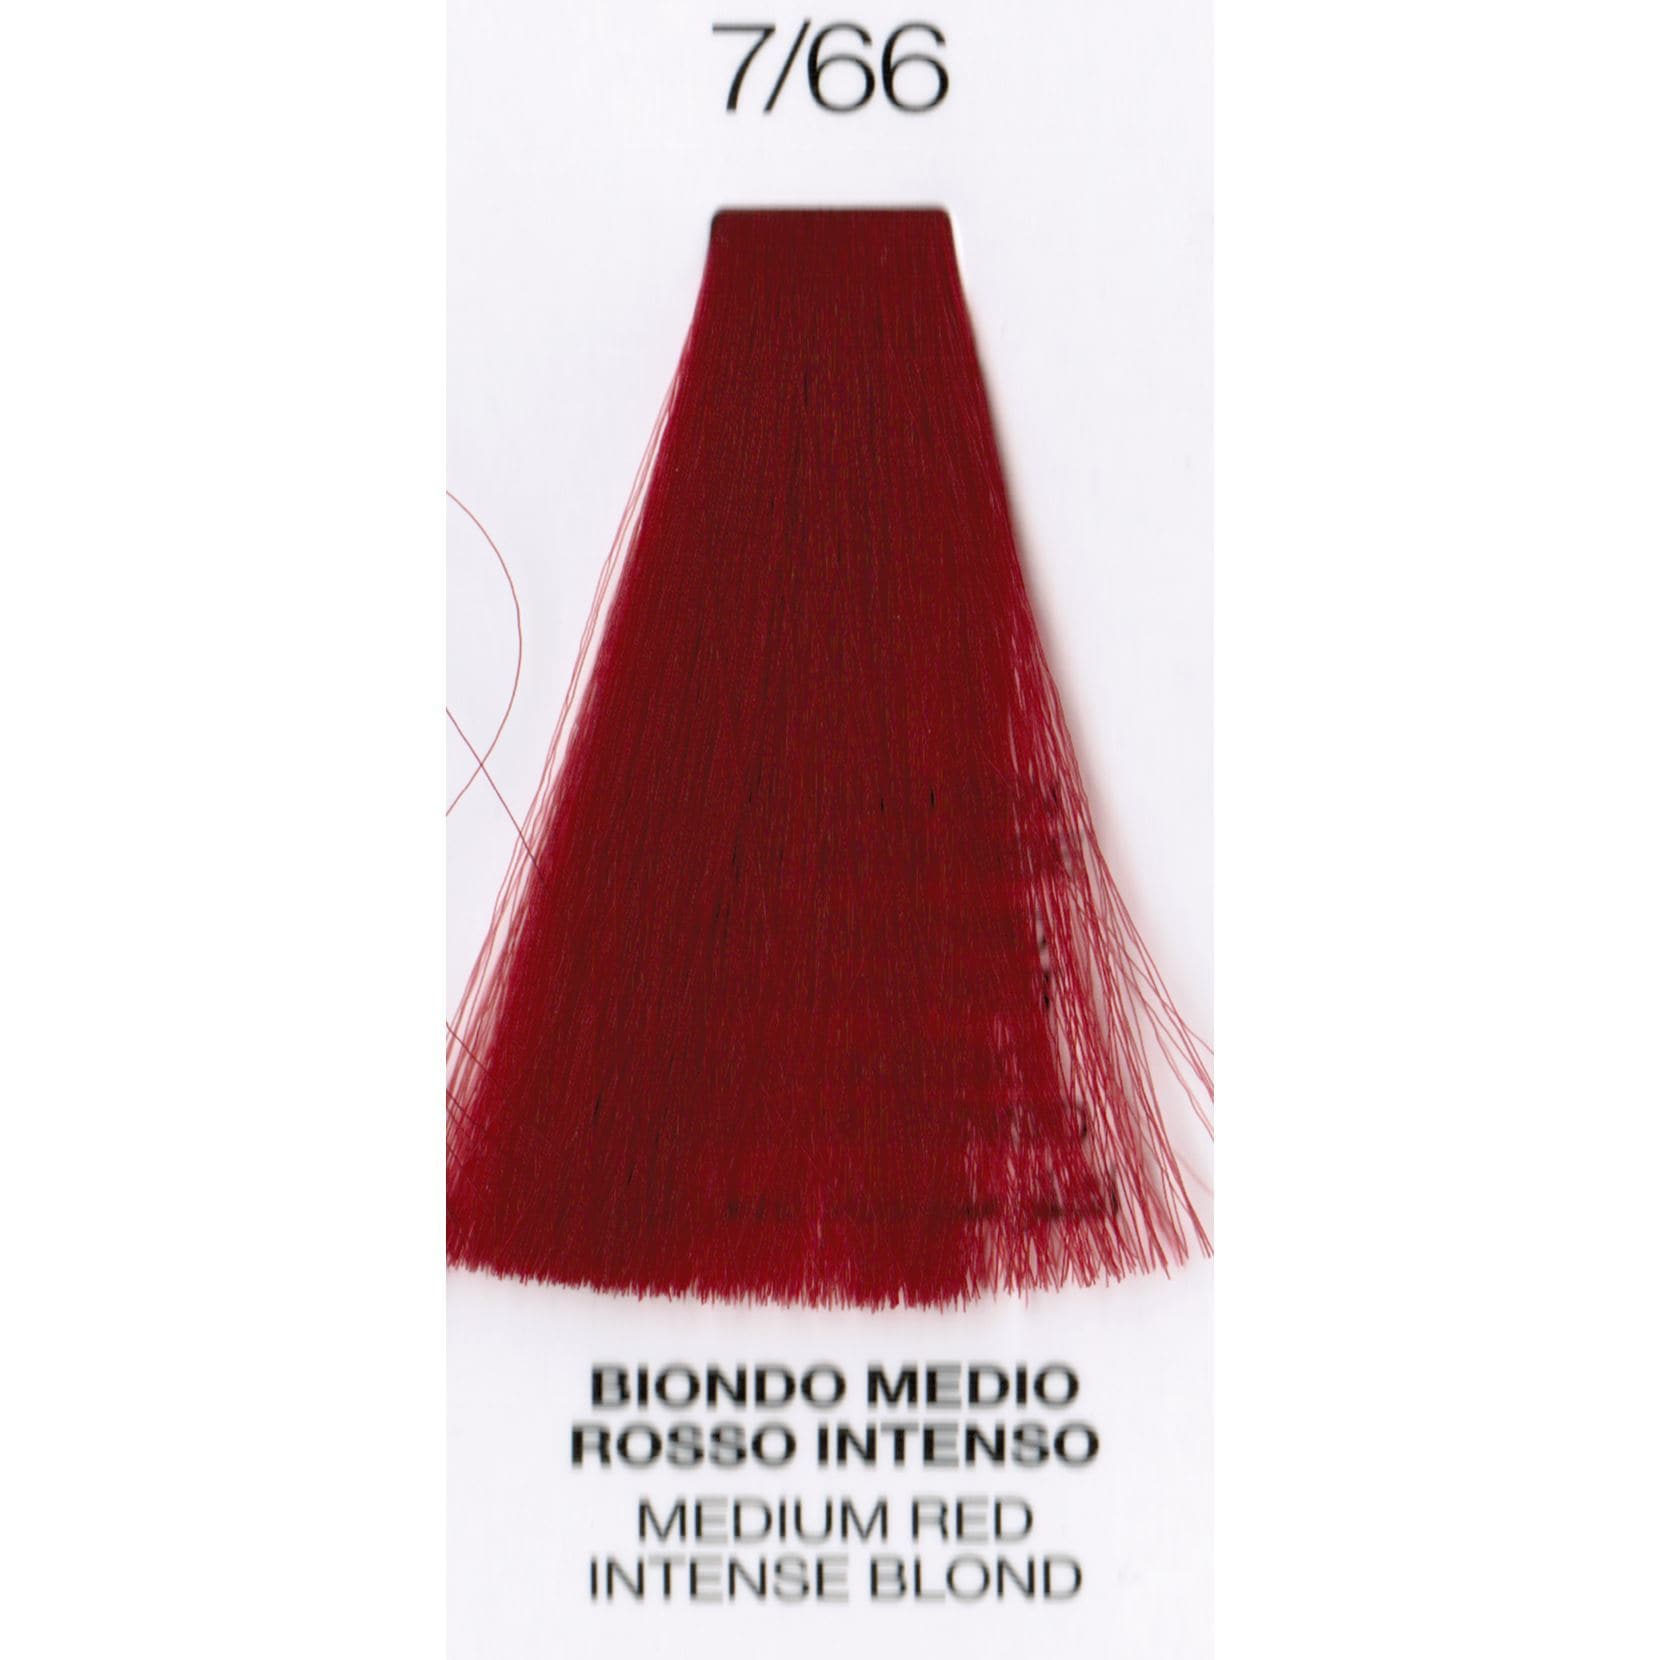 7/66 Medium Red Blonde Intense | Purity | Ammonia-Free Permanent Hair Color HAIR COLOR OYSTER 